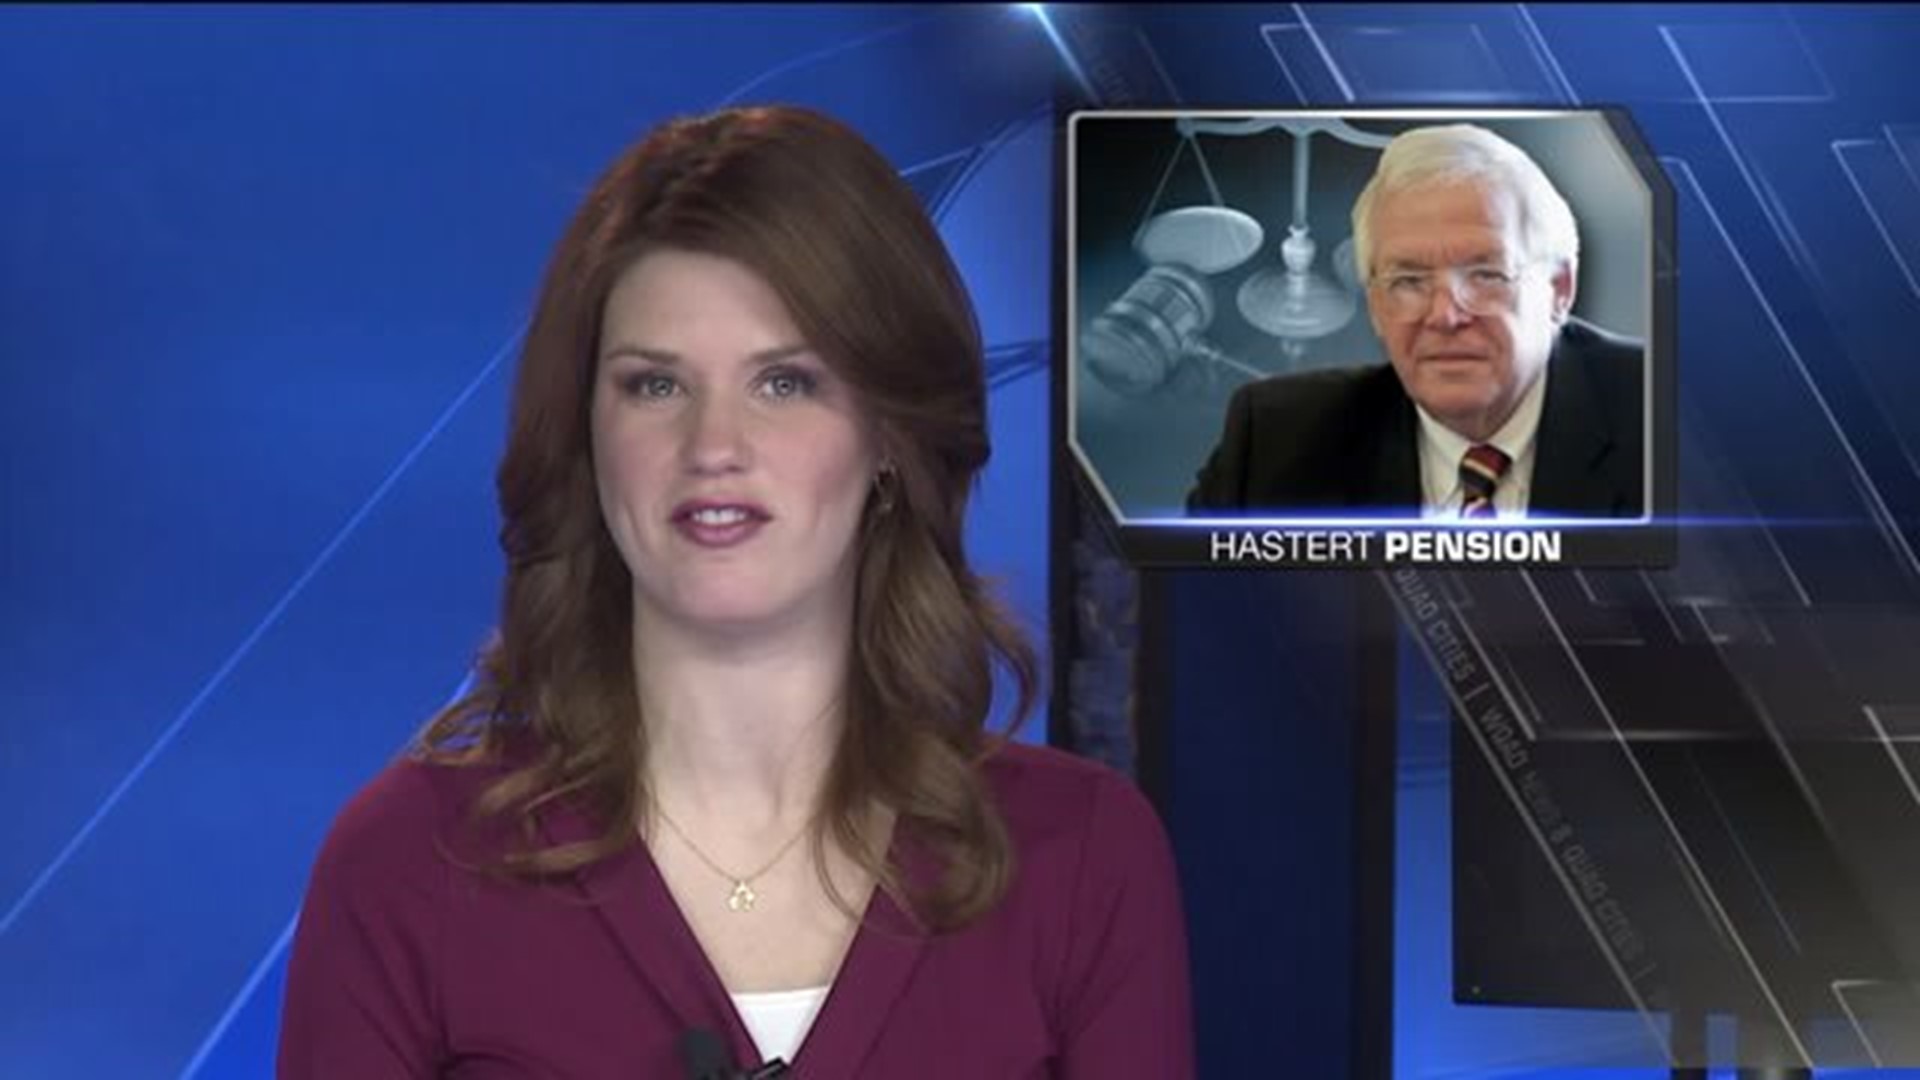 Hastert pension up in the air